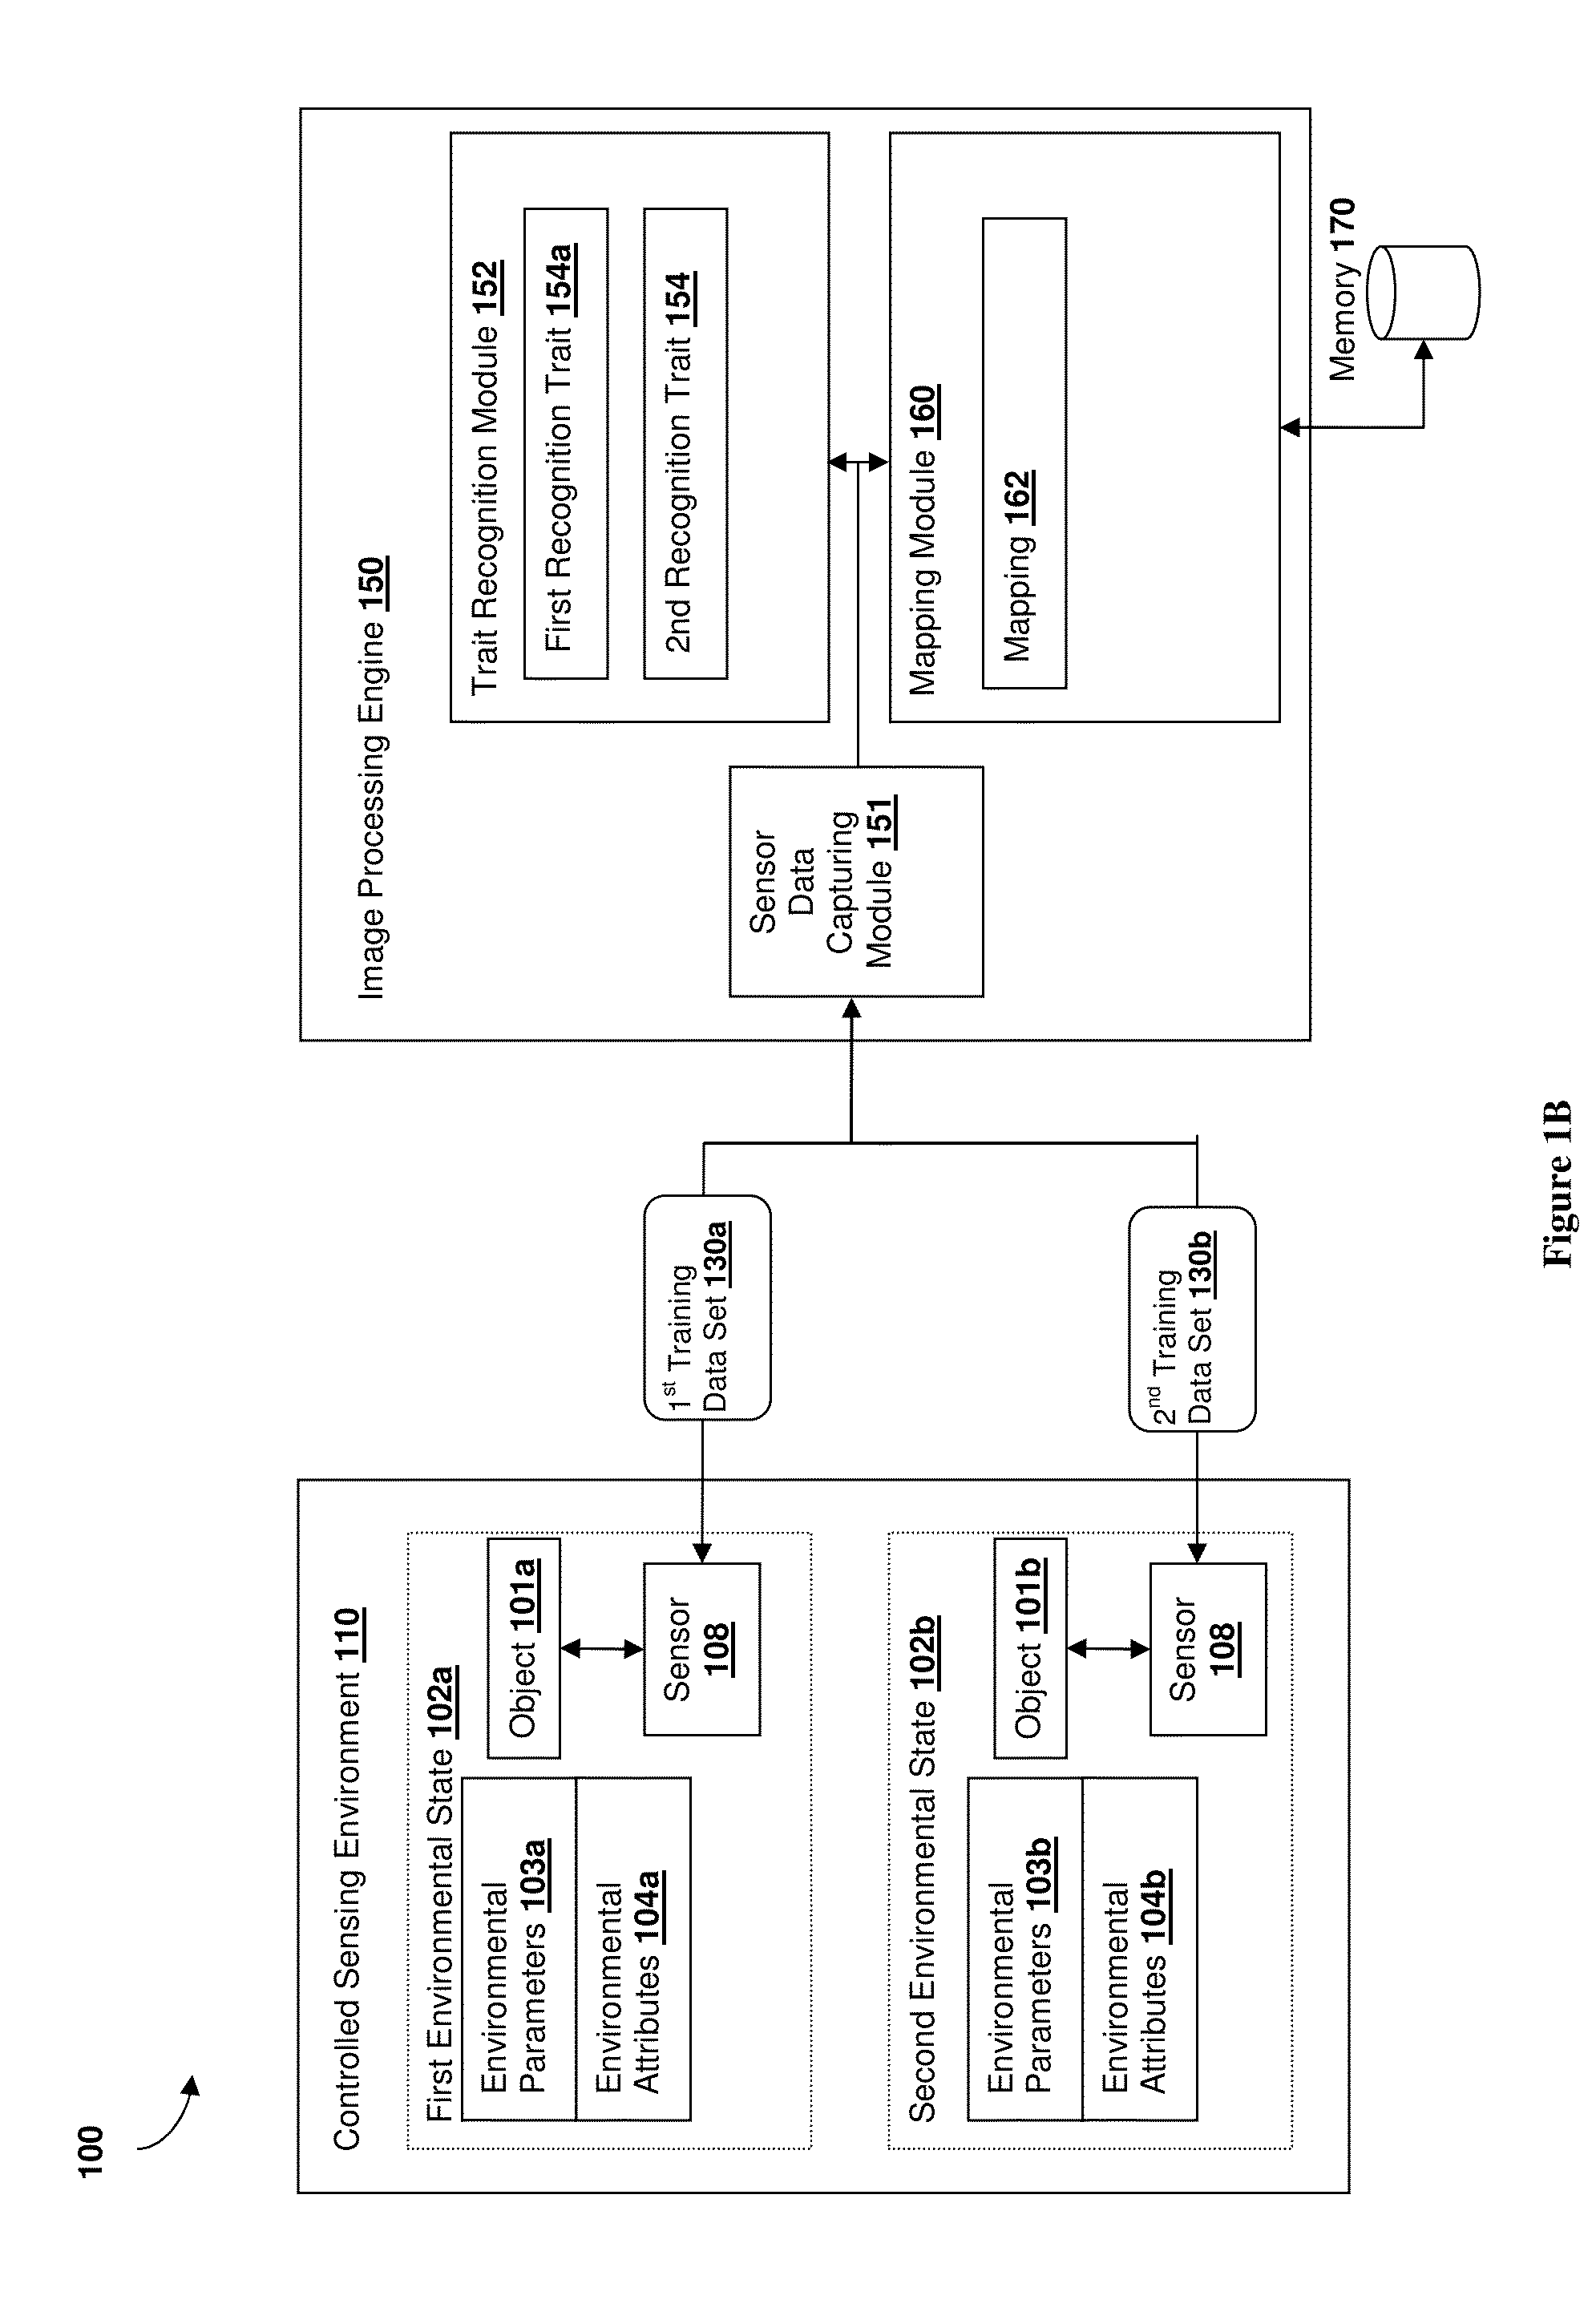 Invariant-based dimensional reduction of object recognition features, systems and methods